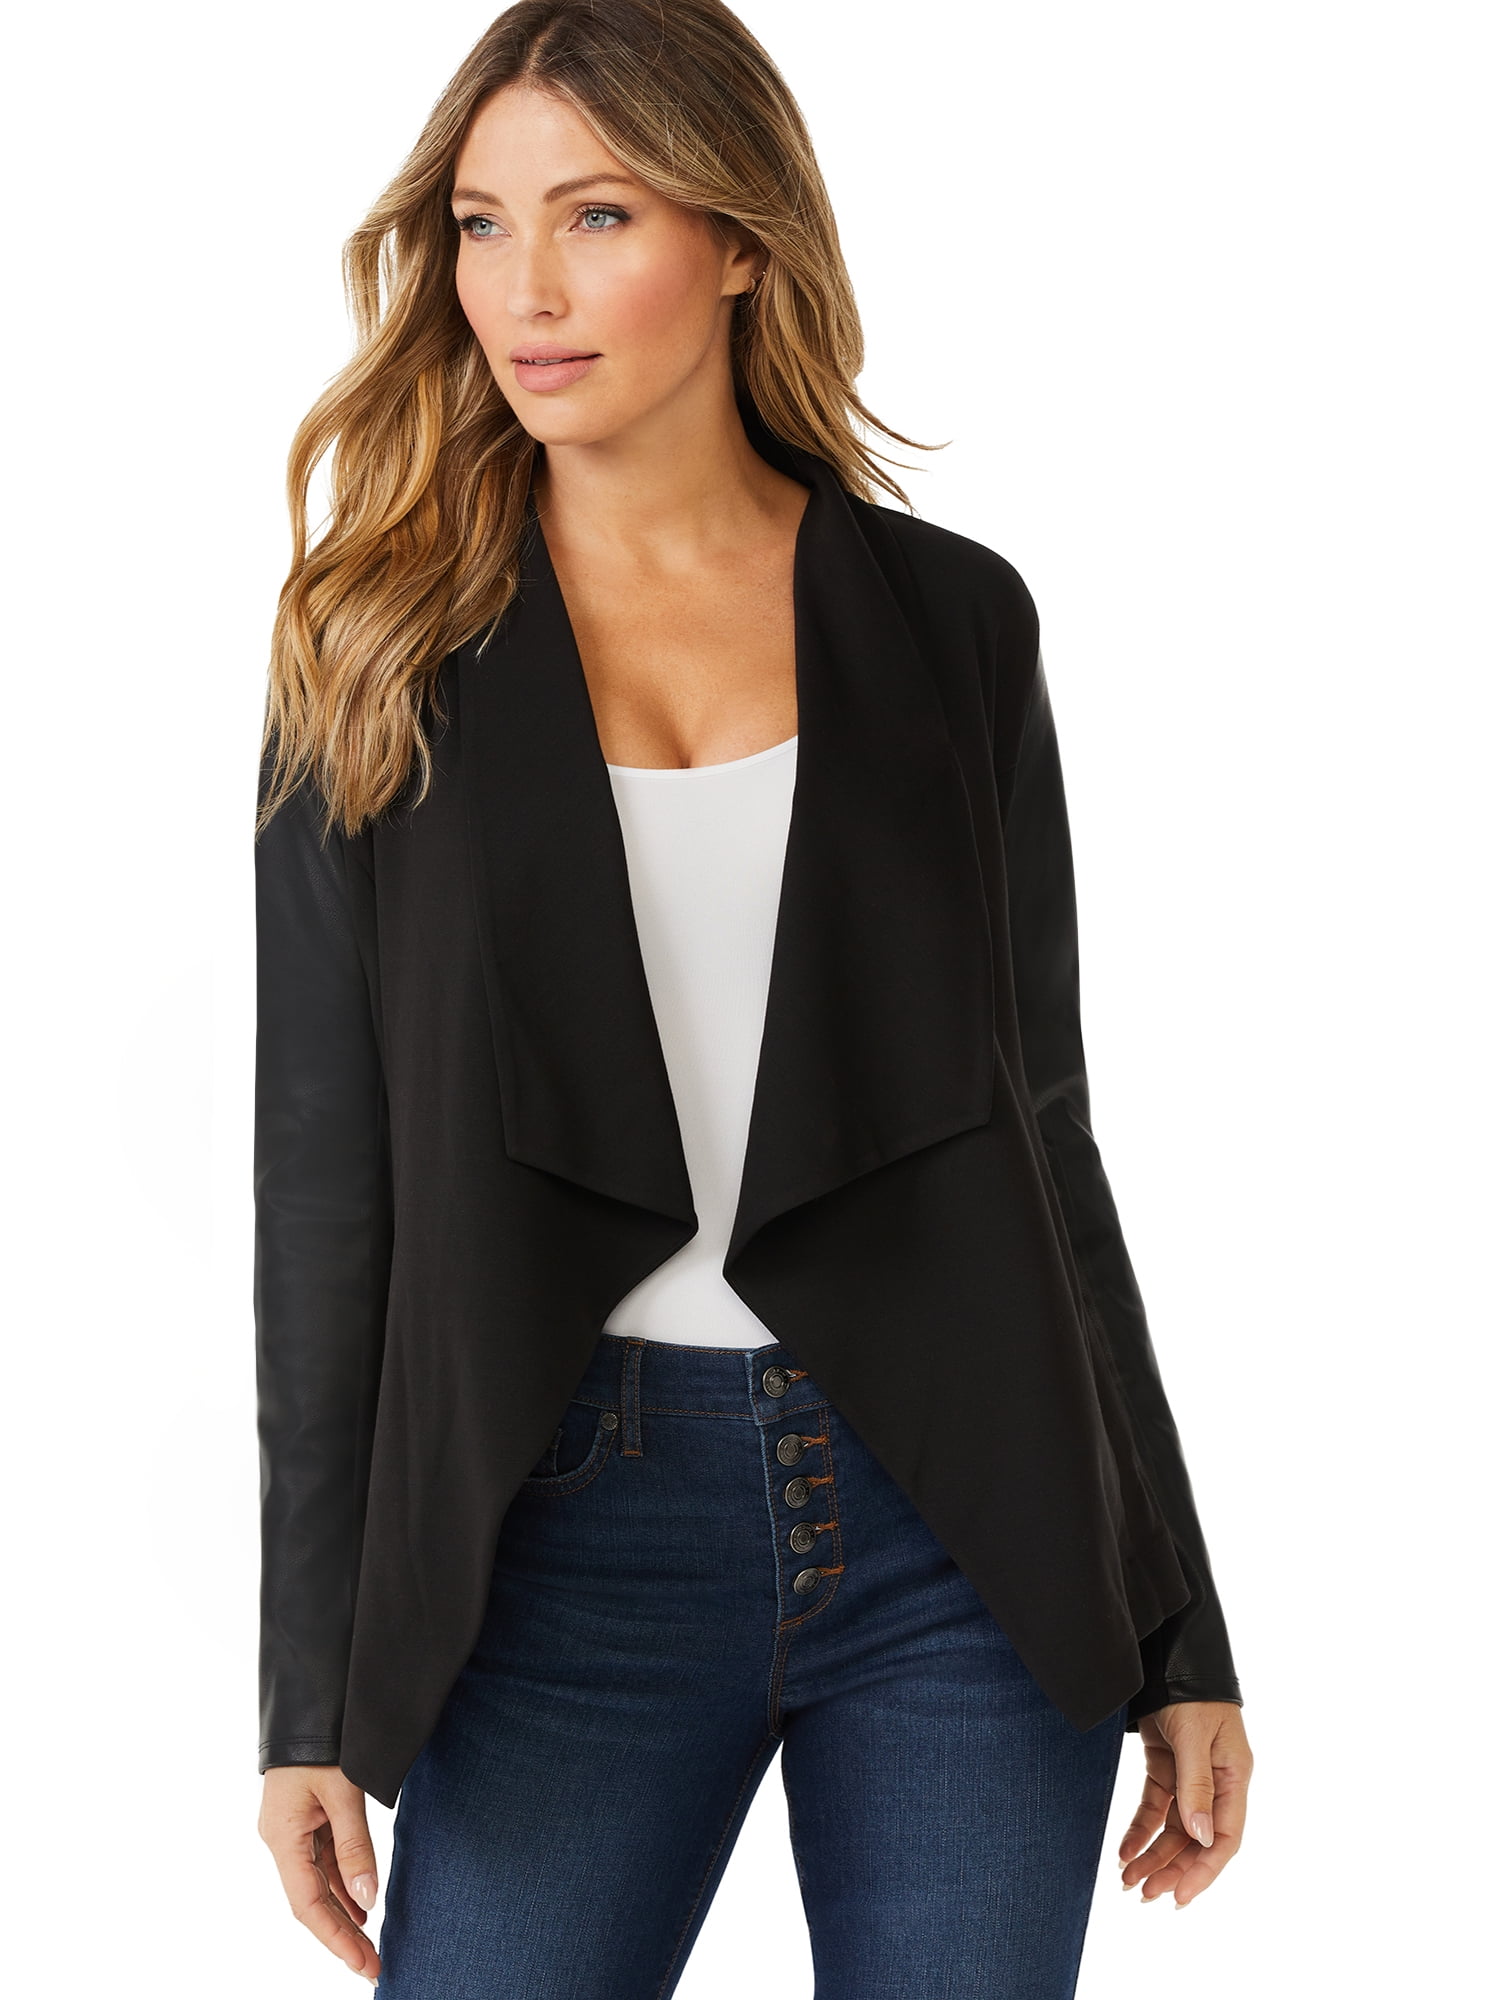 Sofia Jeans by Sofia Vergara Women's Drape Front Jacket with Faux Leather  Sleeves